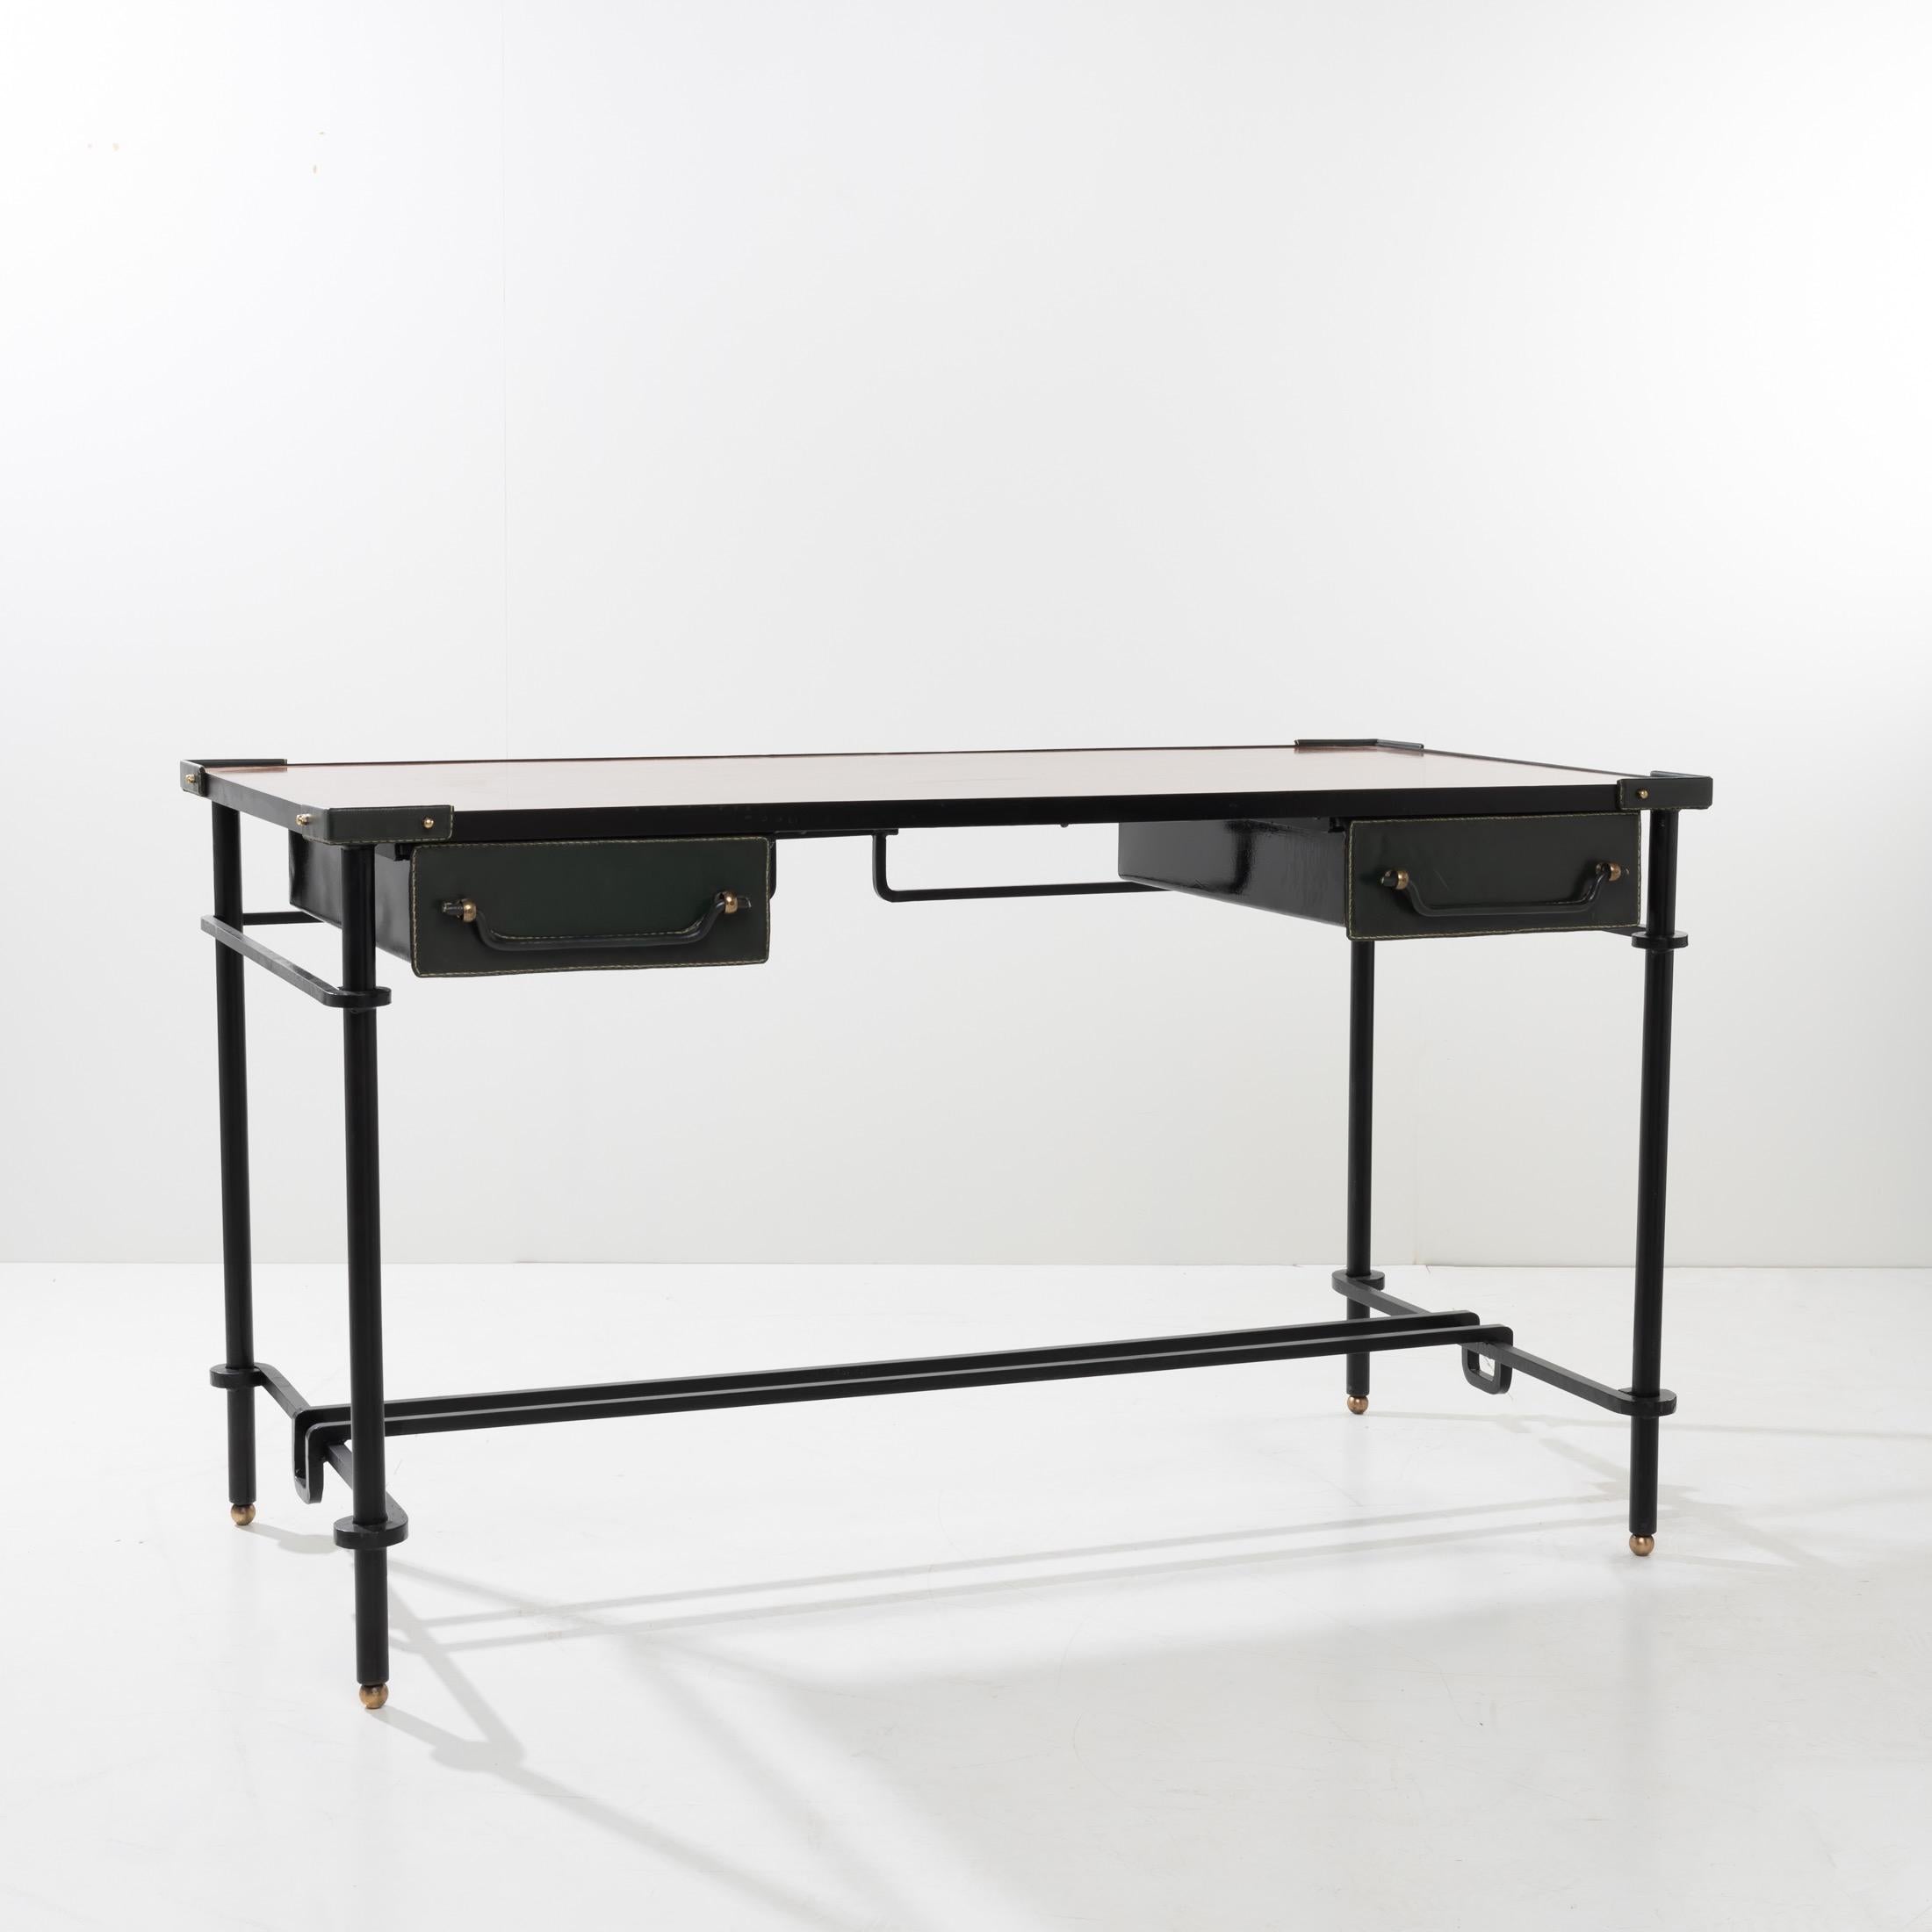 Steel Wrought Iron Desk with Two Sliding Drawers by Jacques Adnet